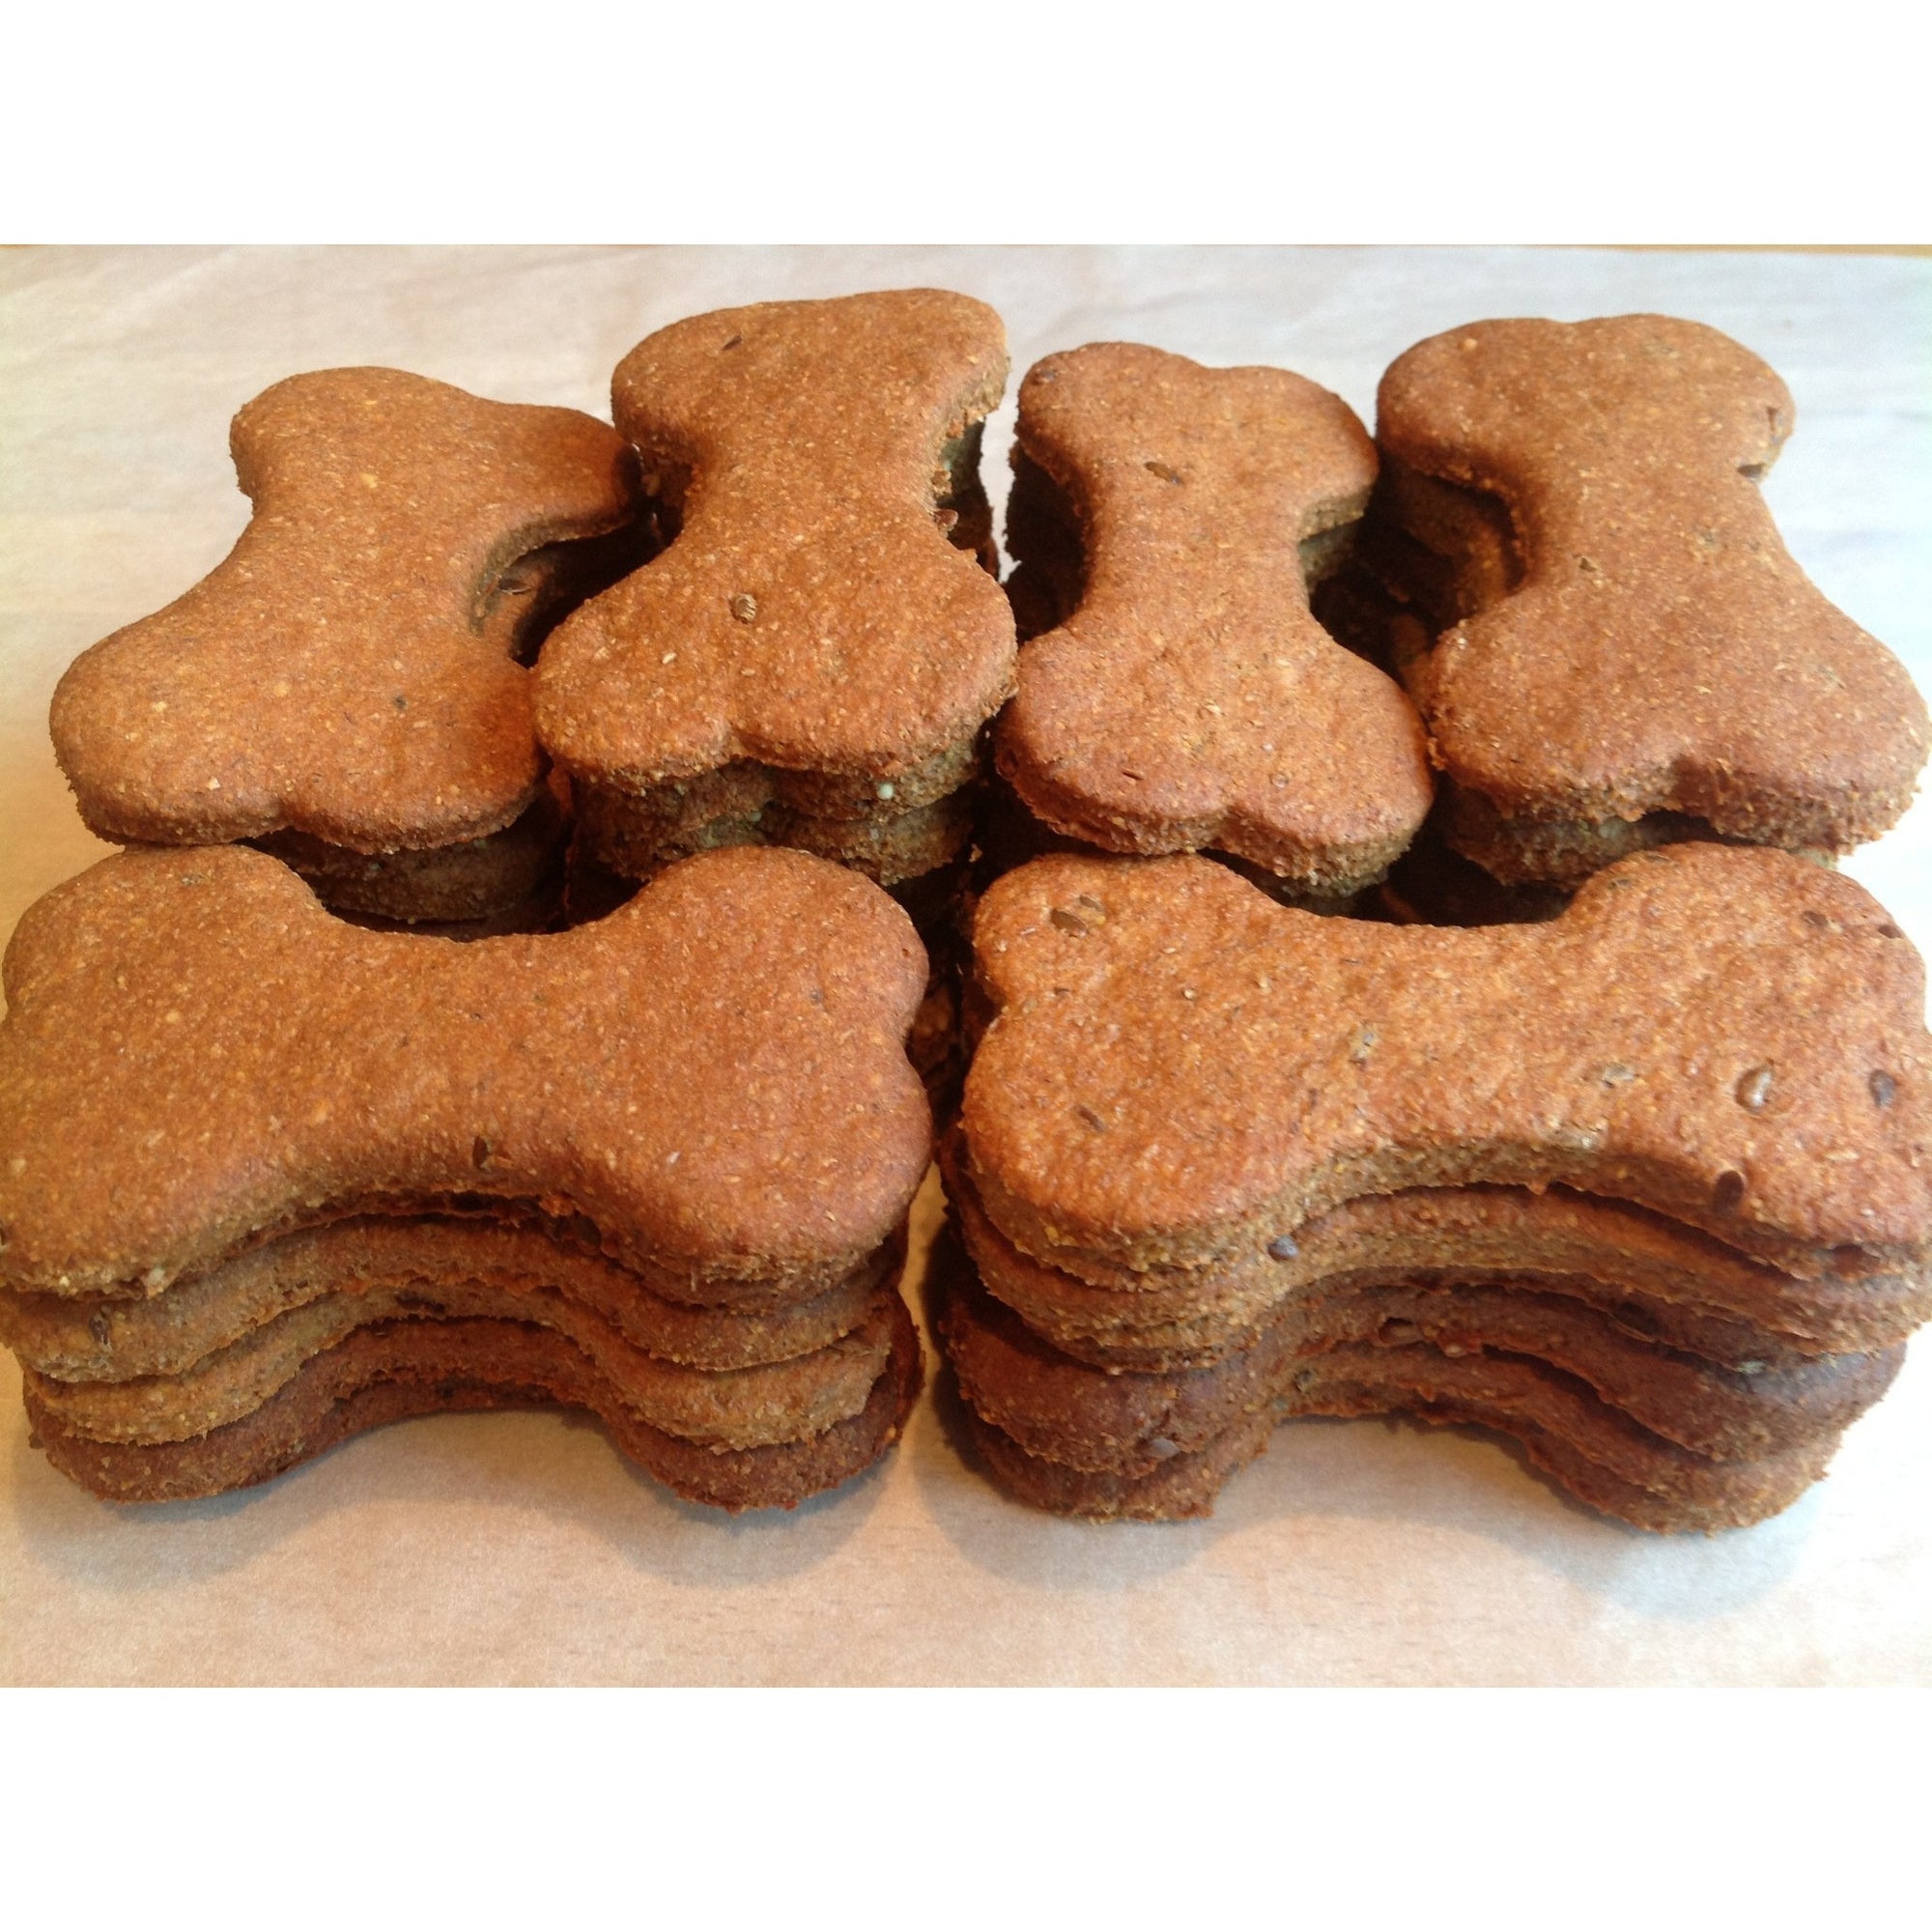 Cheese & Natural Yeast Extract dog biscuits